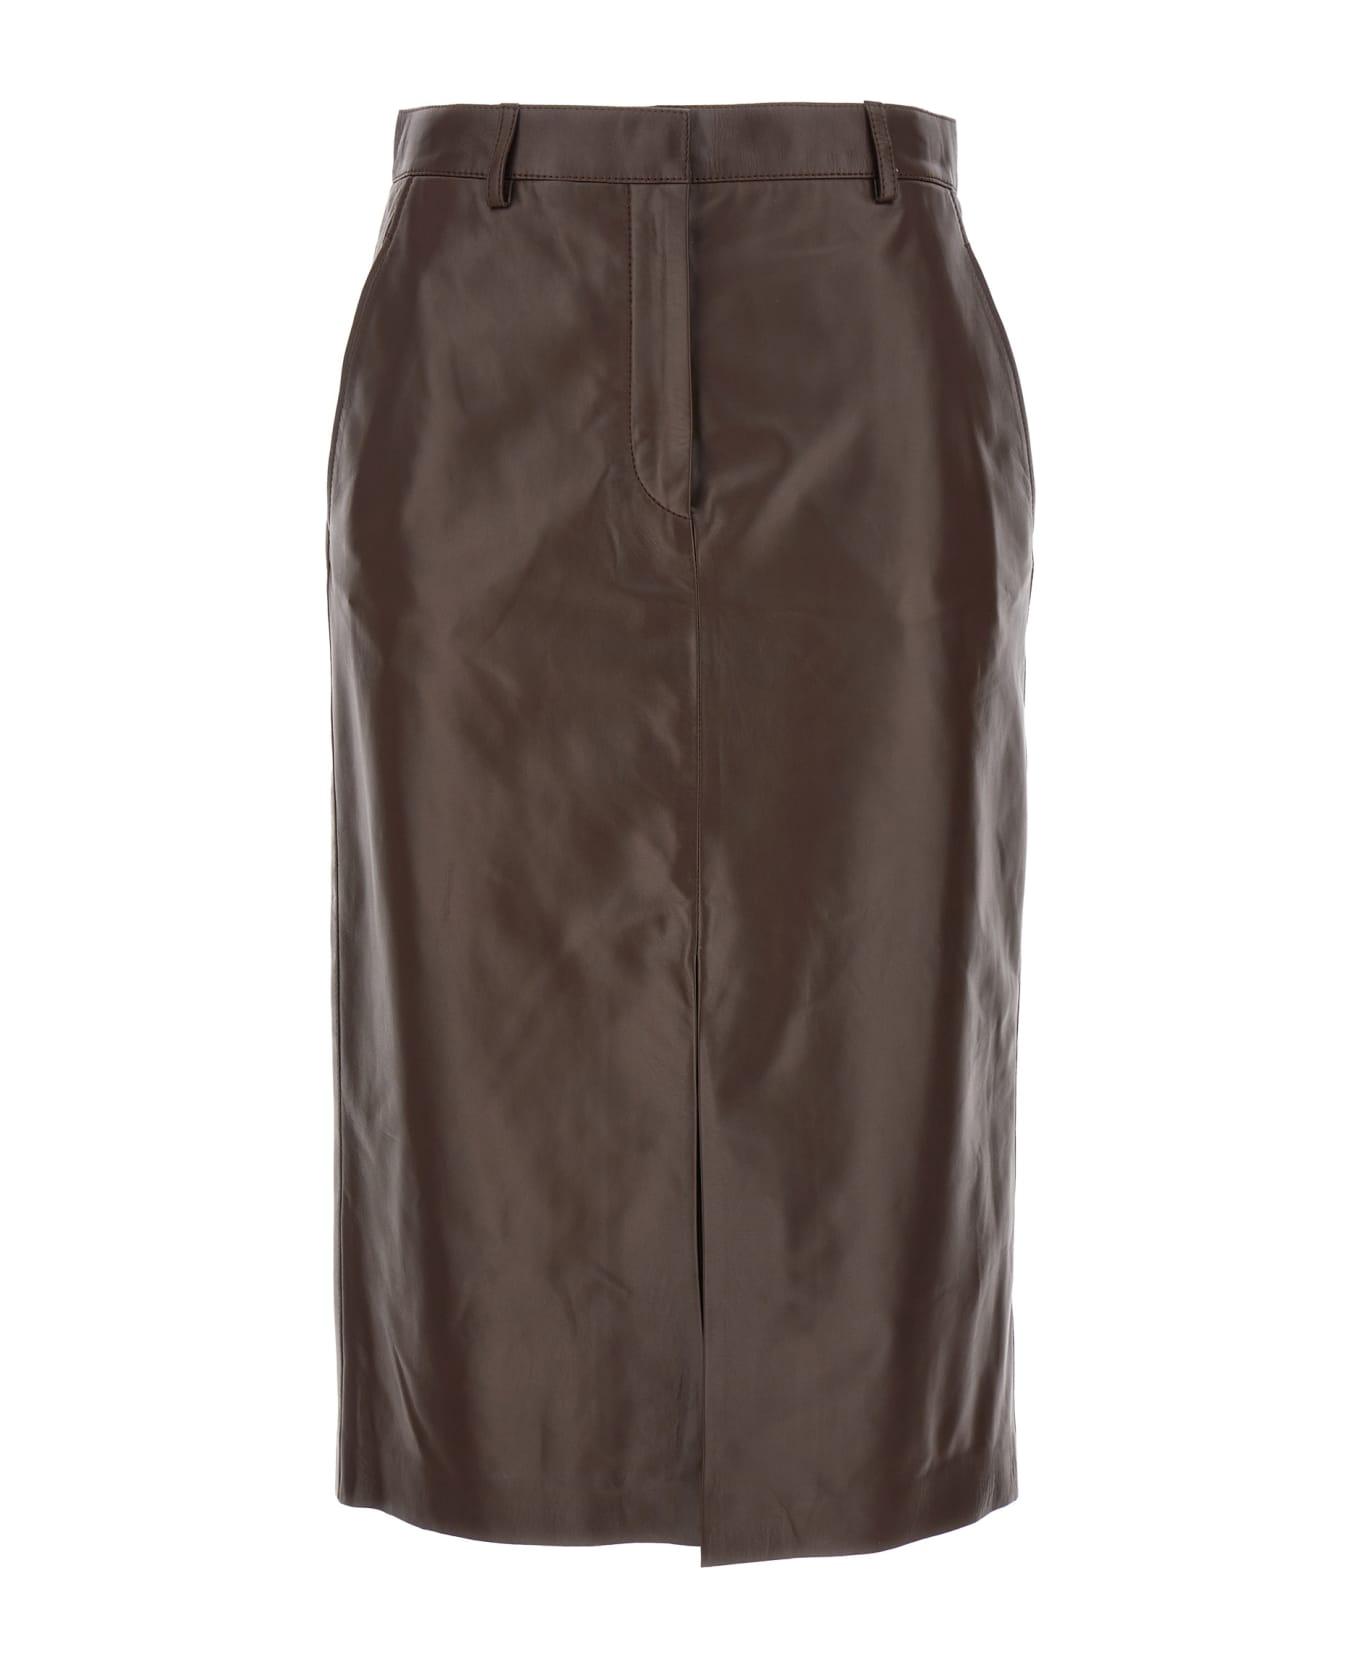 Lanvin Leather Skirt - Brown